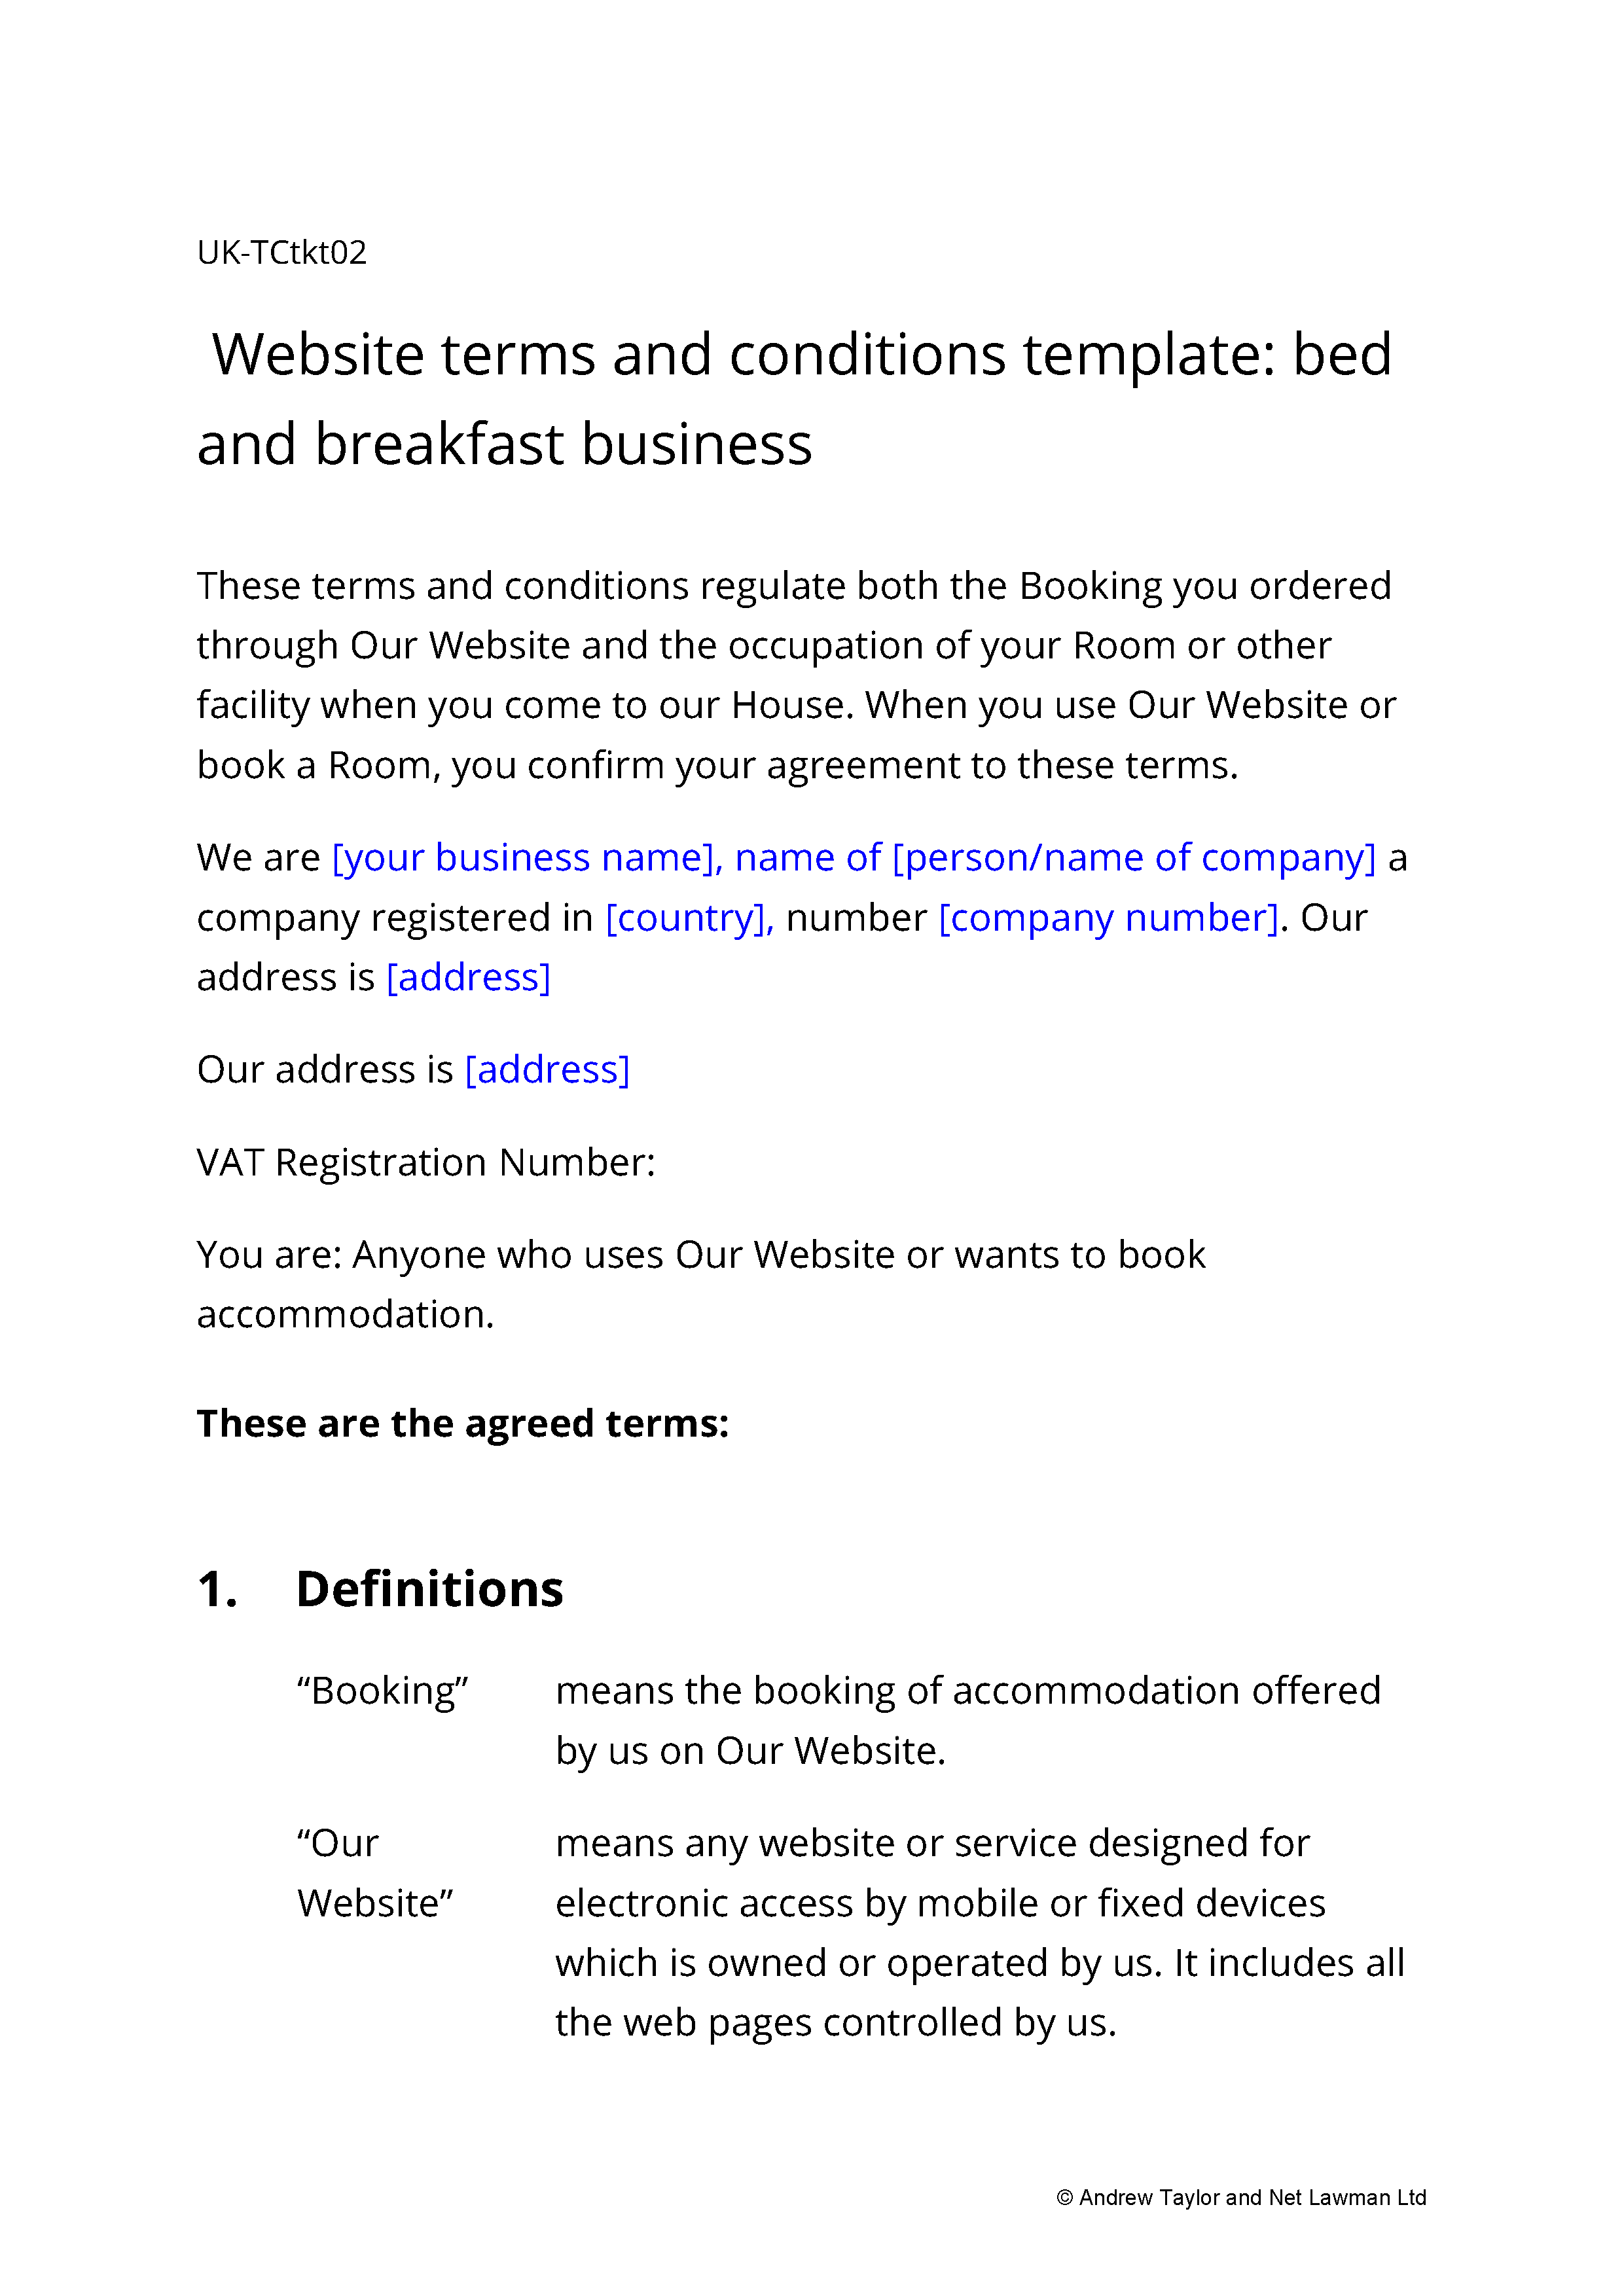 Sample page from the website terms for a B&B business